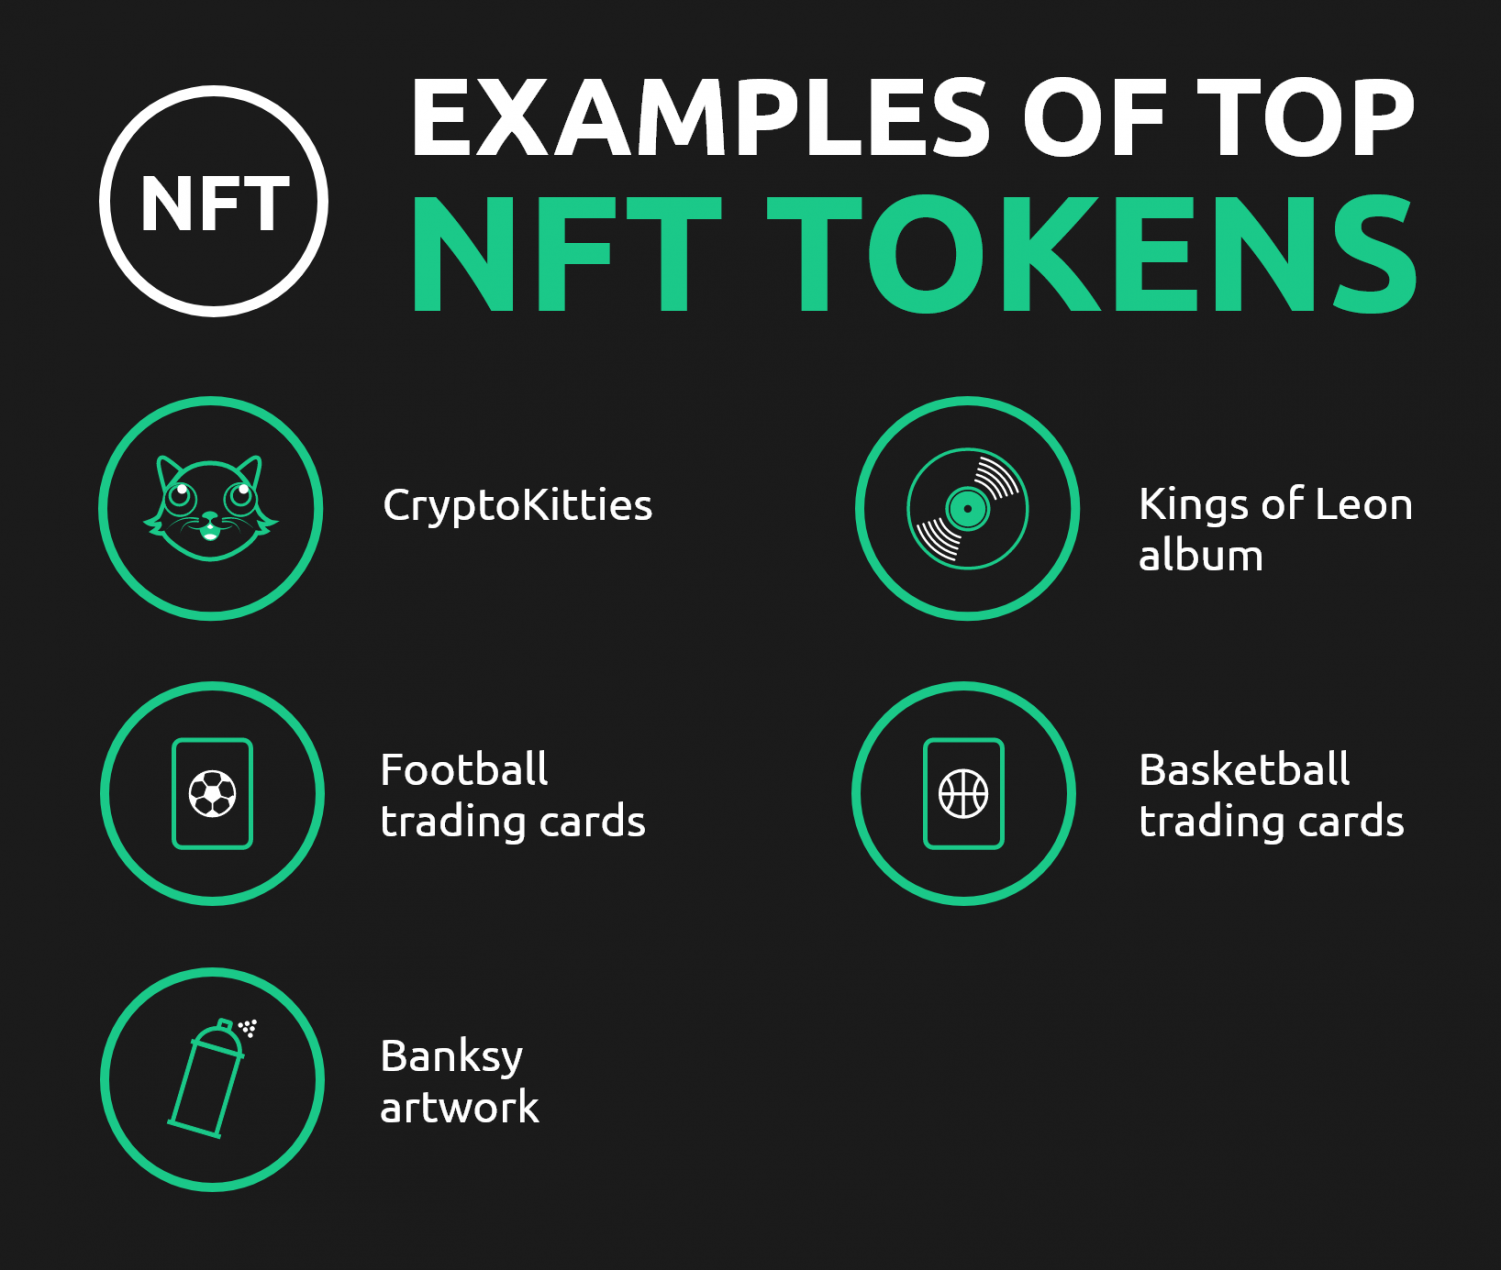 What Are Non-Fungible Tokens | NFTs Explained